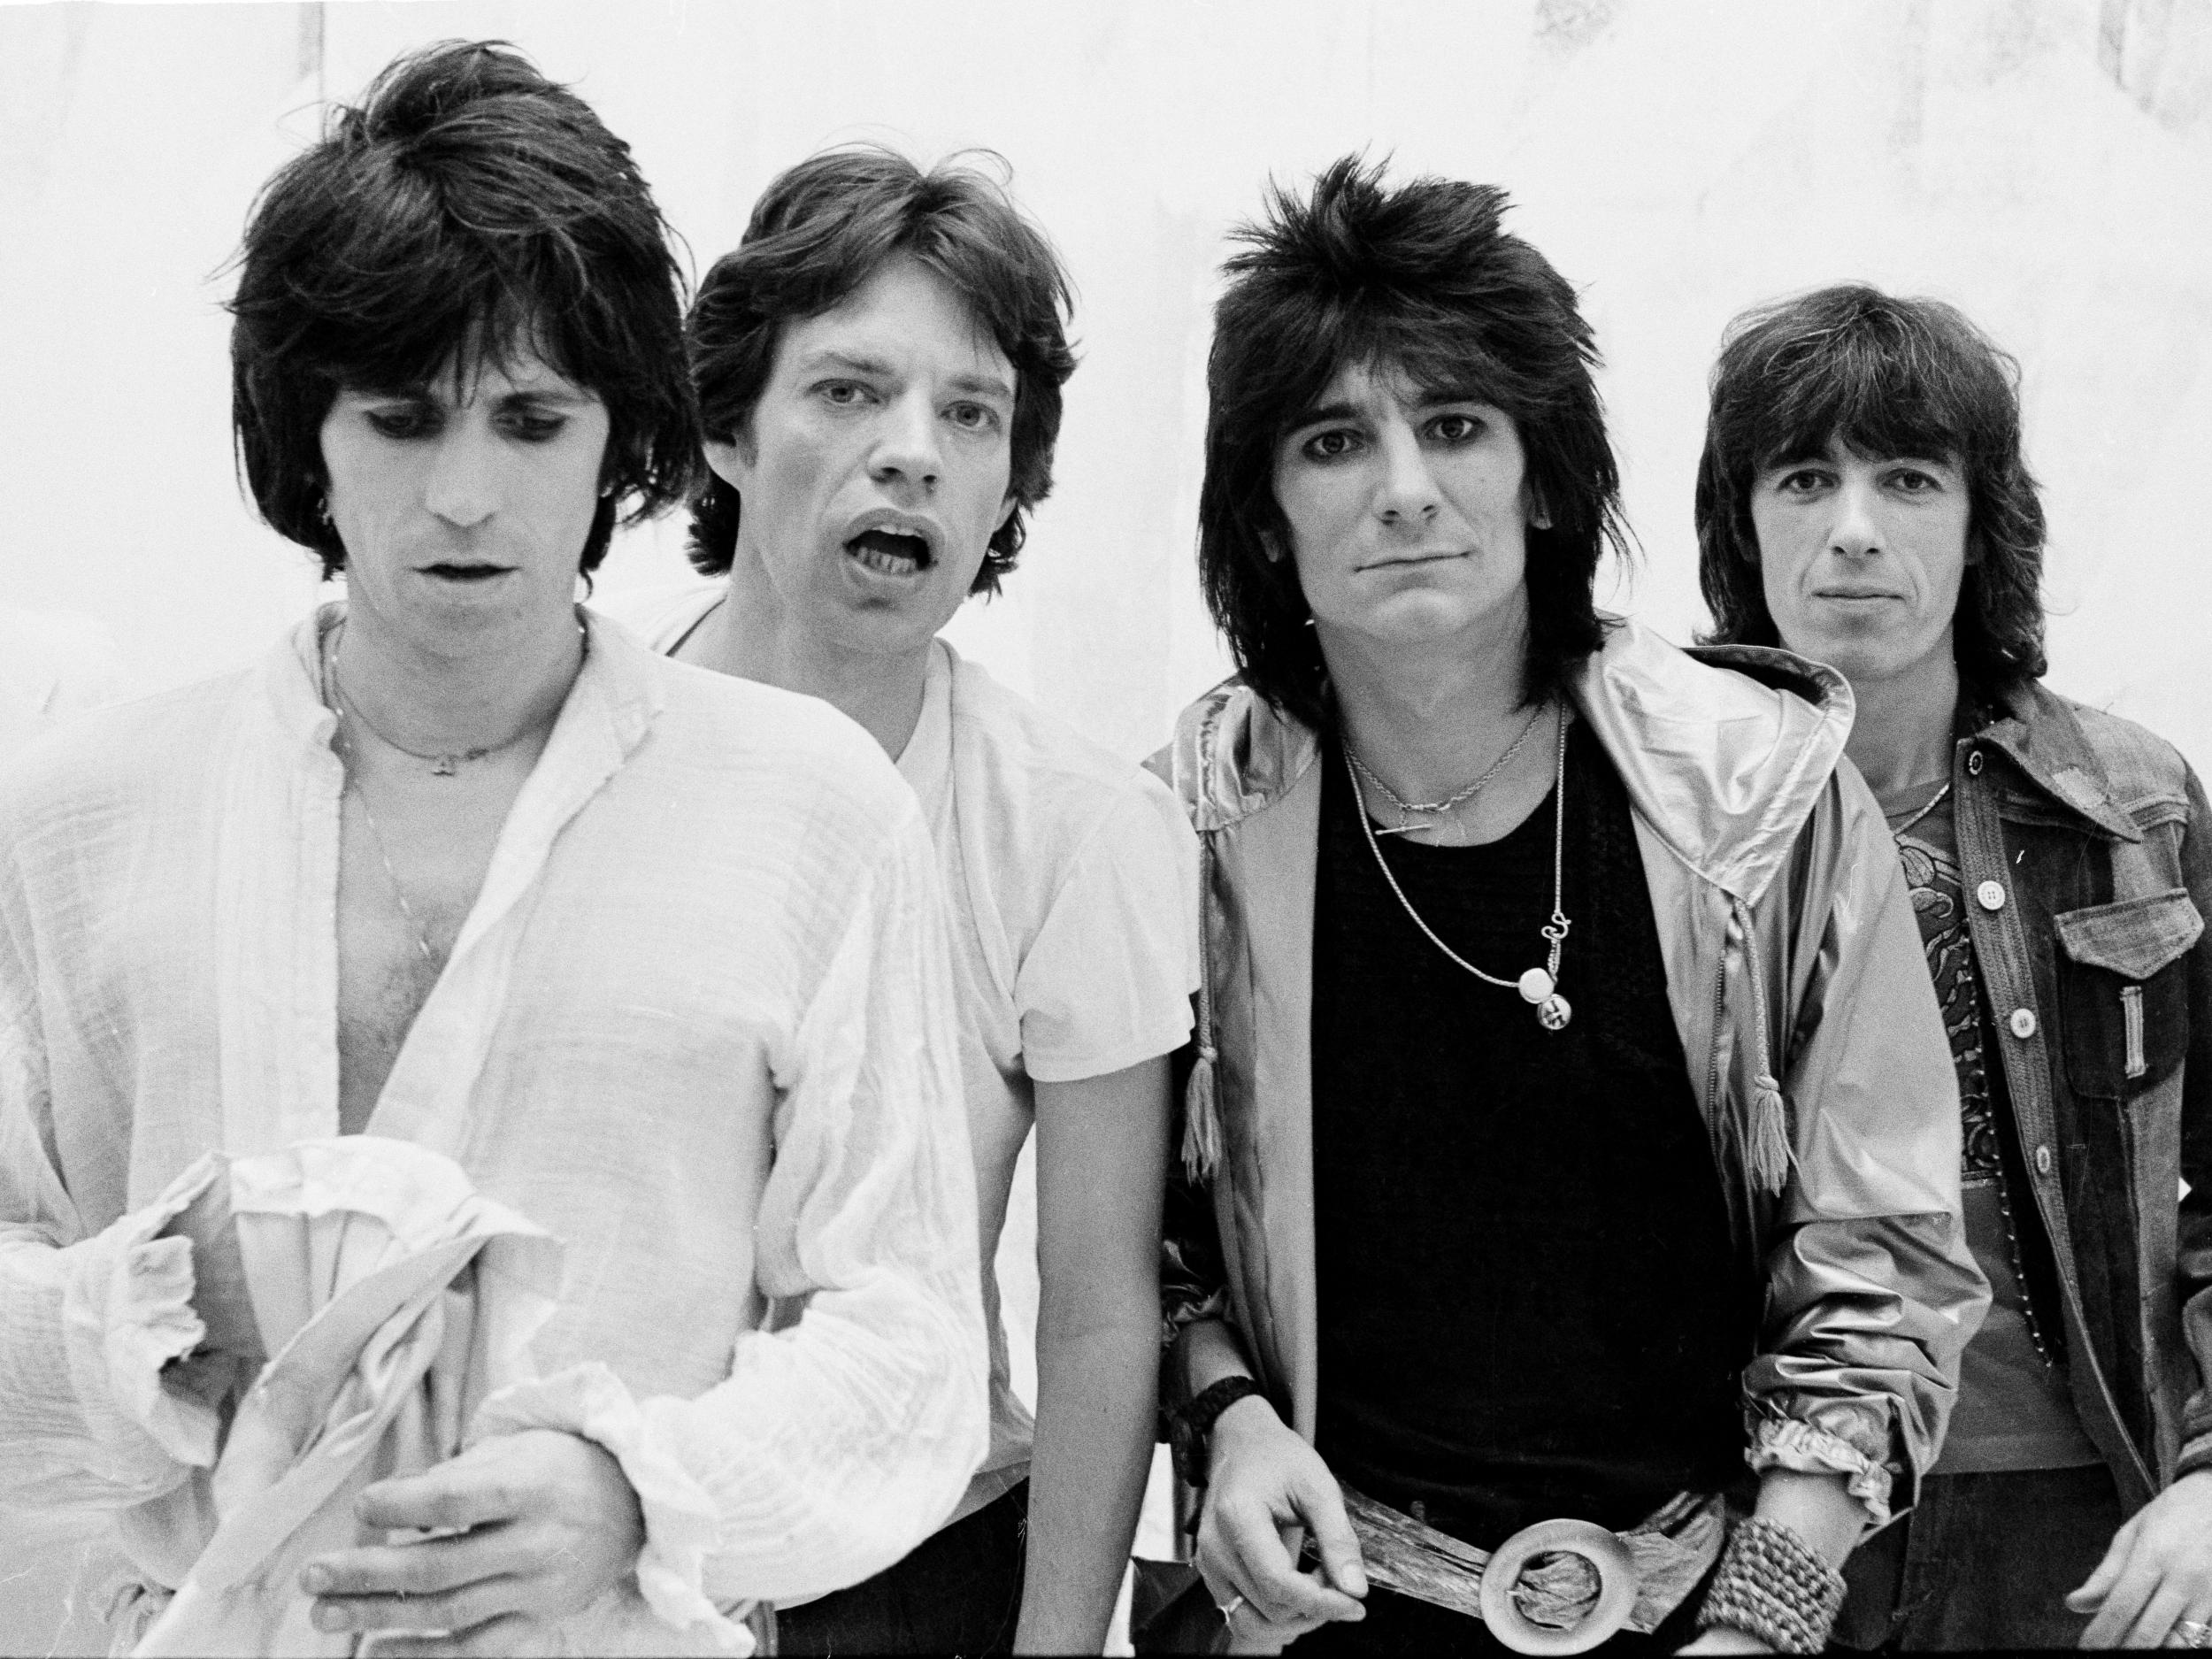 ‘Some Girls’ was something of a comeback album for The Rolling Stones (Getty)